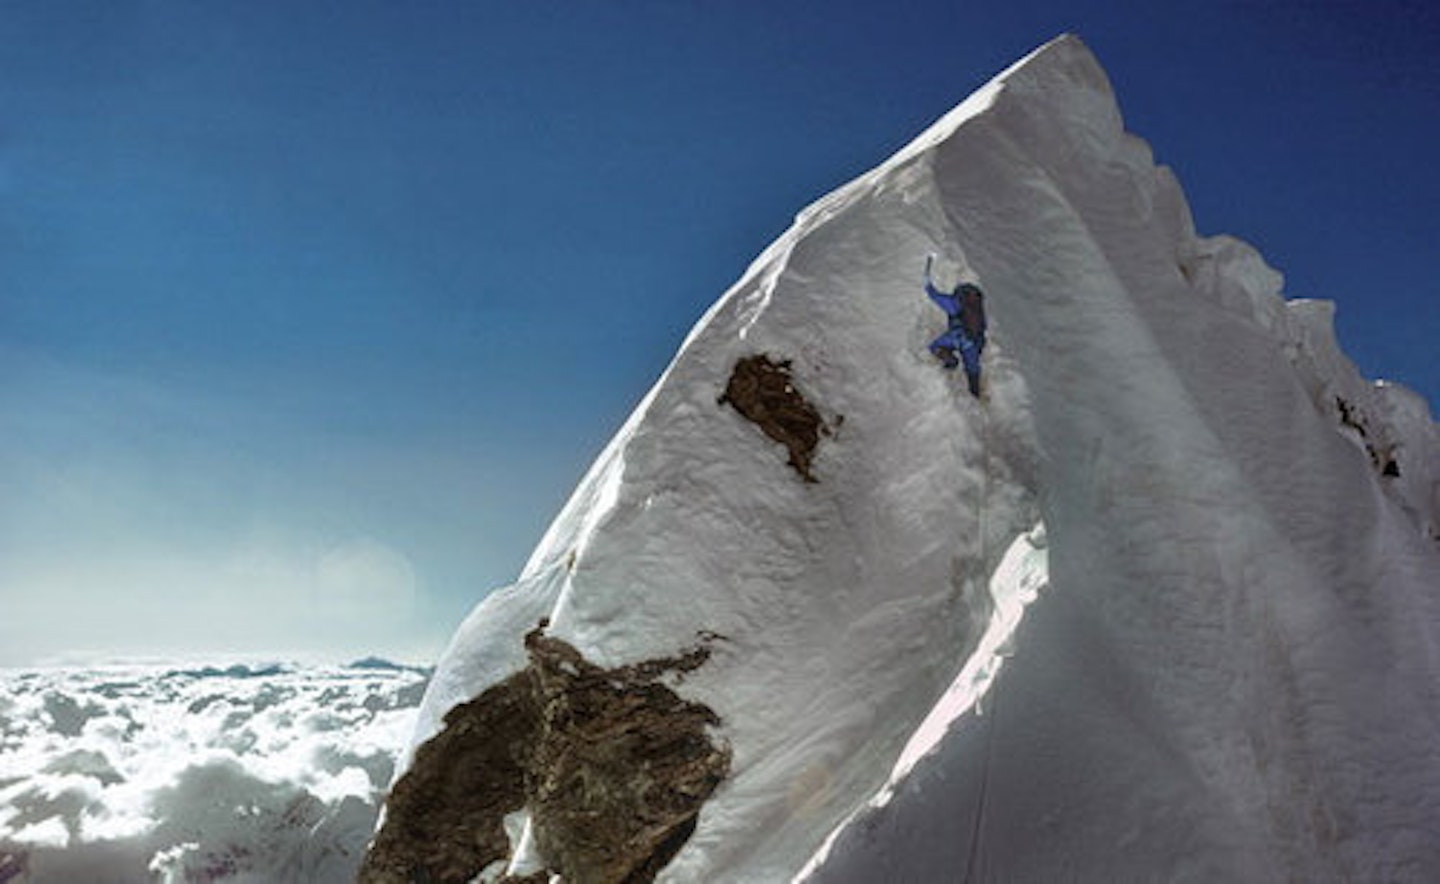 Dougal Haston on the Hillary Step during the first British ascent of Everest, 24 September 1975 – a massive contrast to 2019. Photo © Doug Scott 